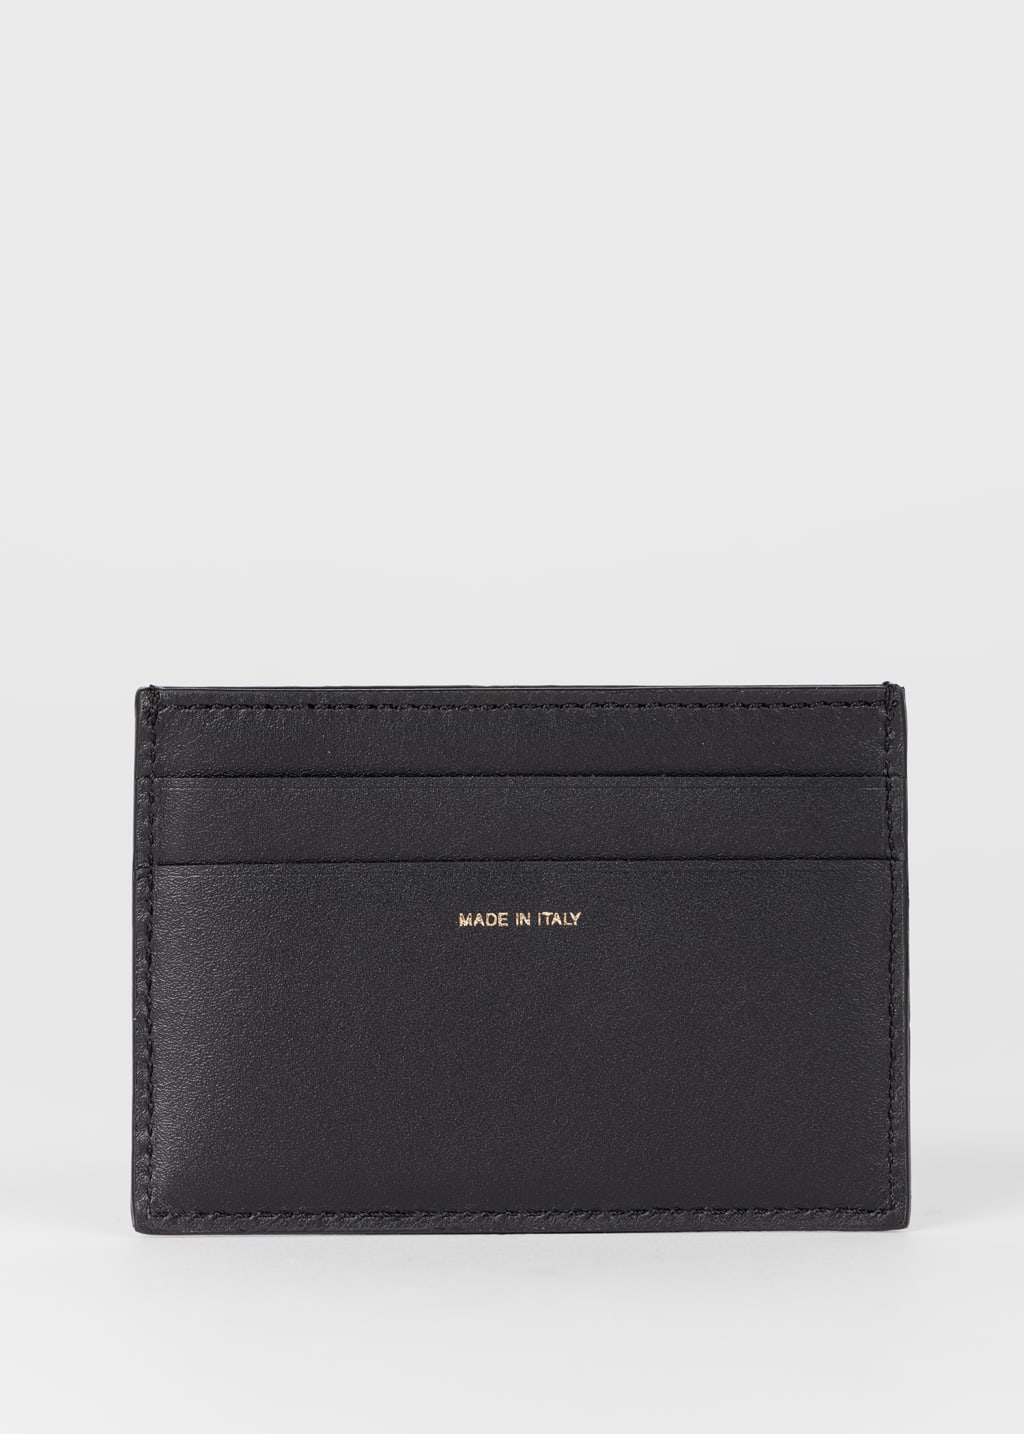 Back View - Black Panelled Leather Card Holder Paul Smith